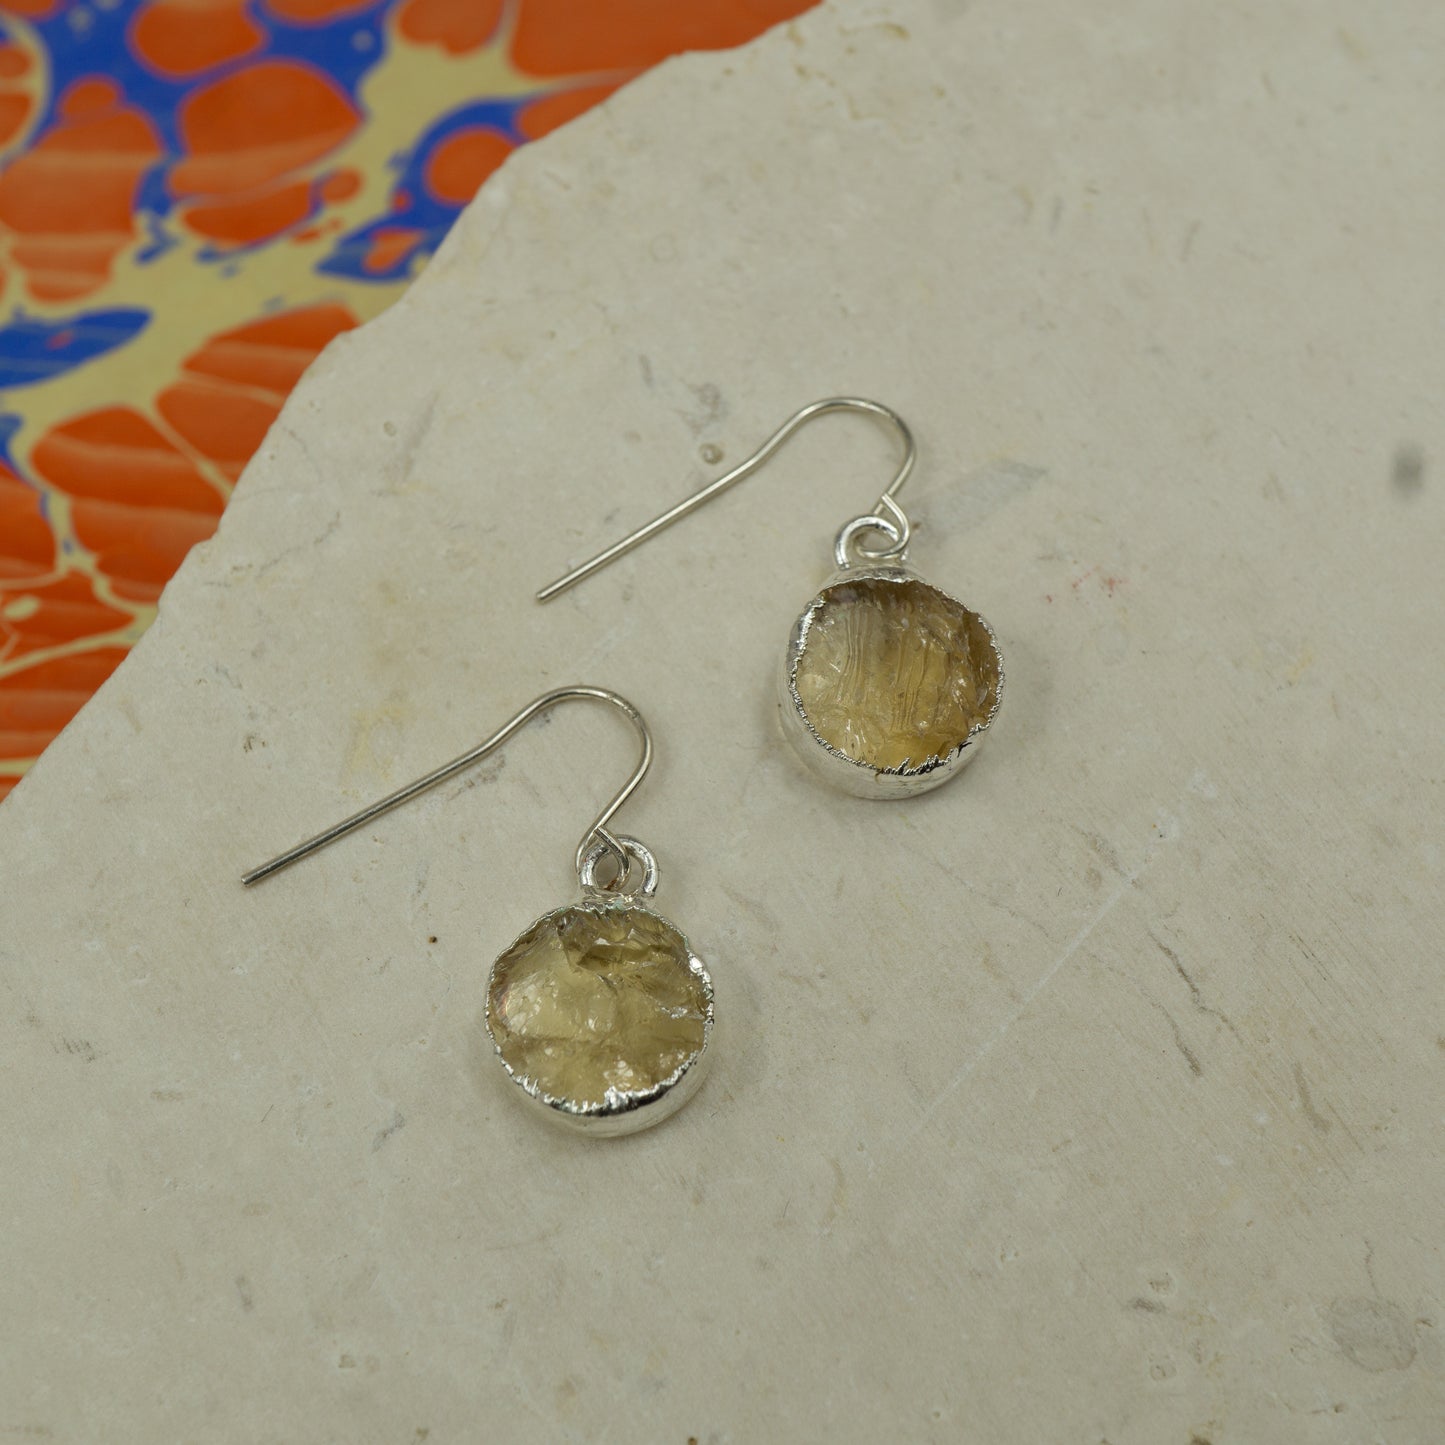 Round raw yellow citrine earrings on hooks finished in silver.